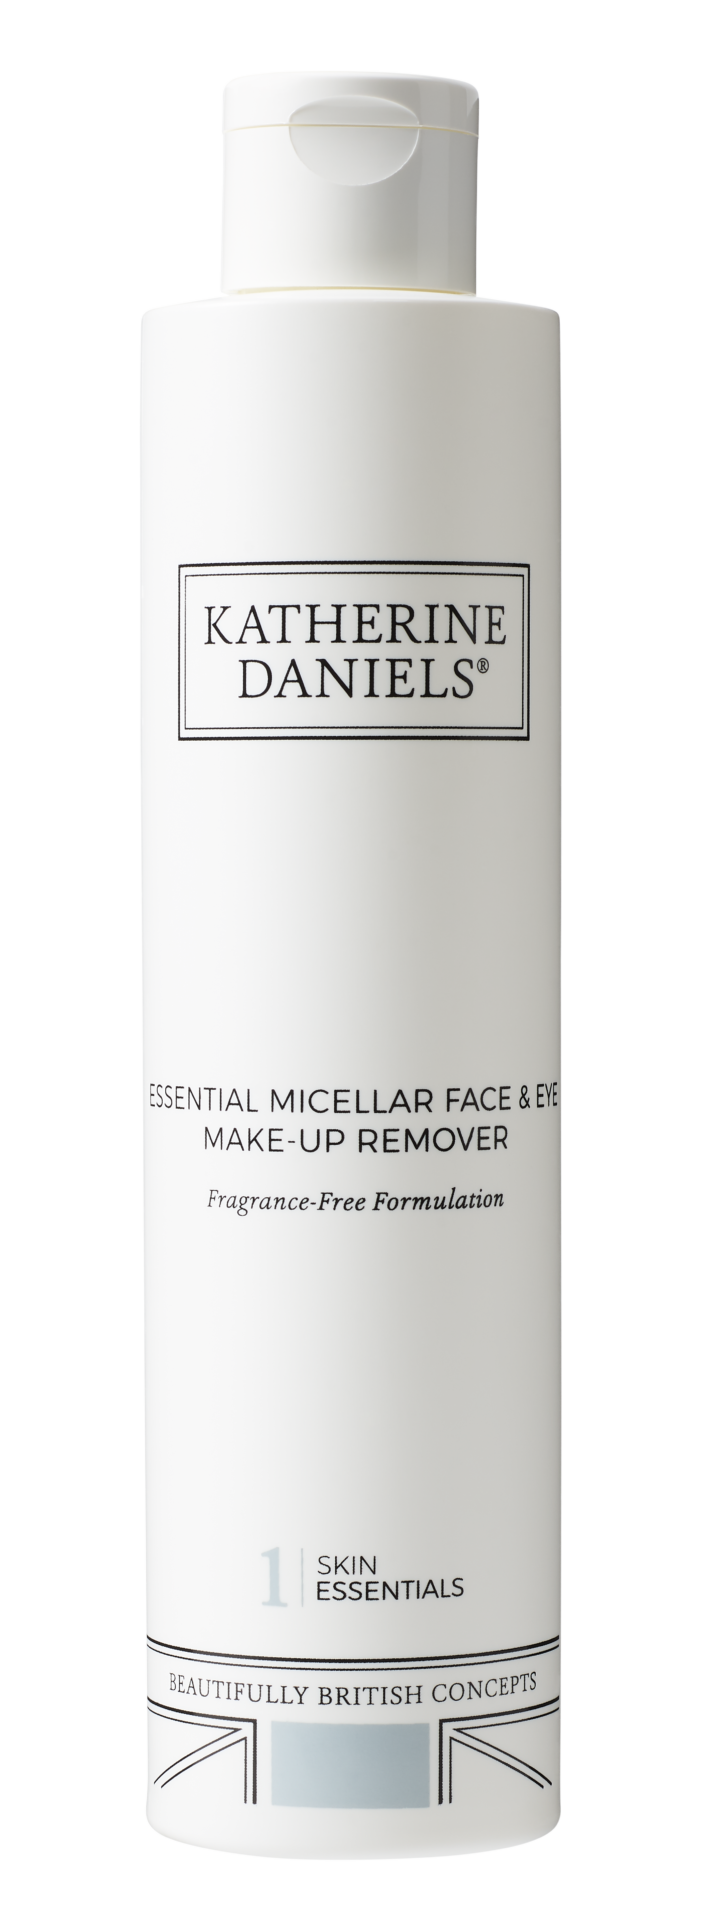 Katherine Daniels Essential Micellar Face & Eye Make-up Remover